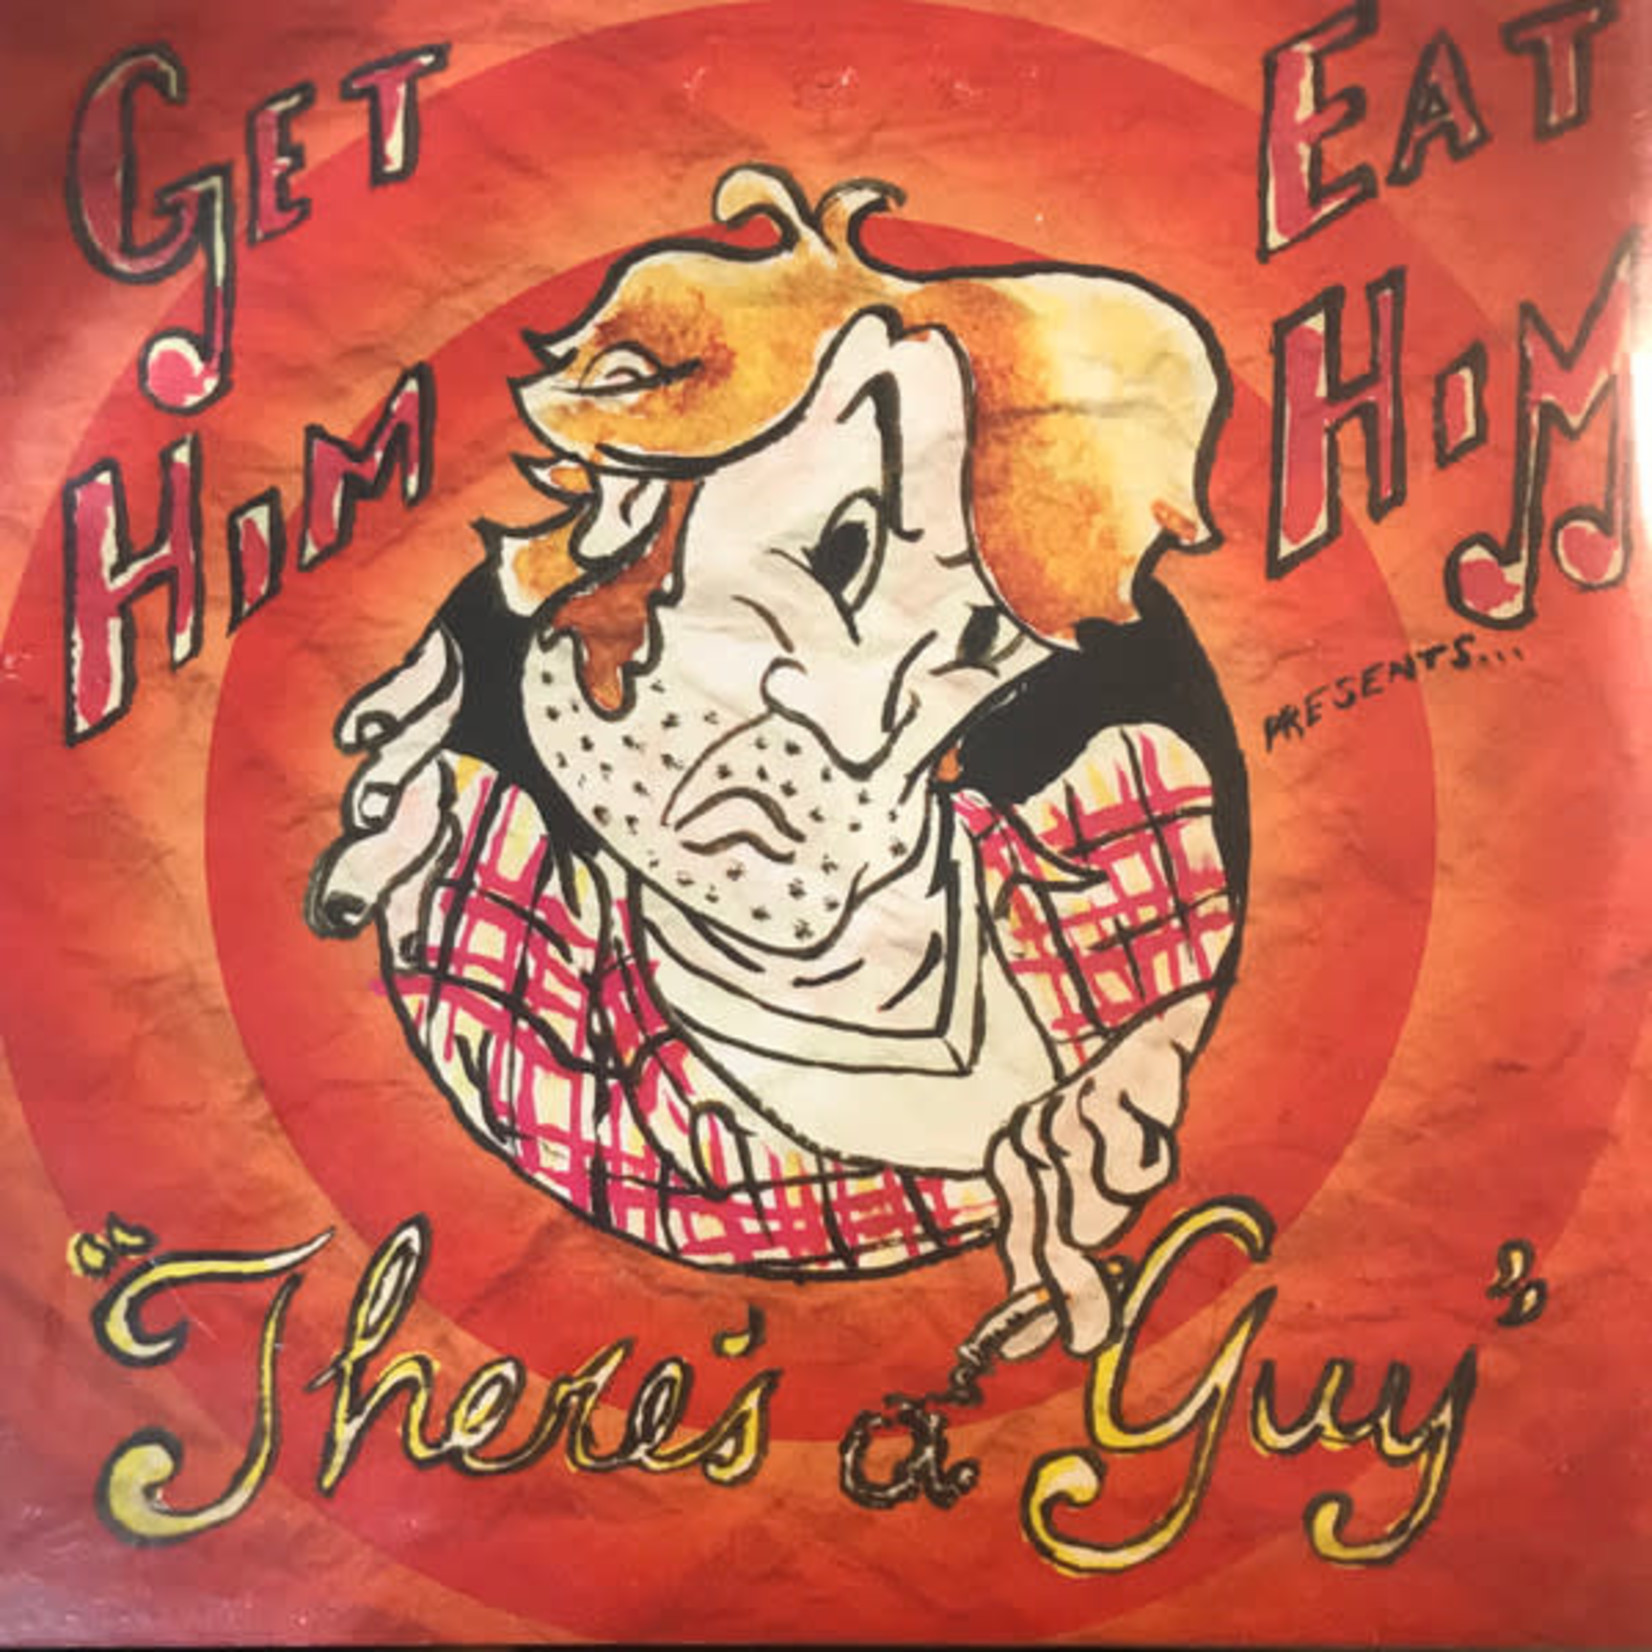 Get Him Eat Him - There's A Guy (7") {VG+/VG+}